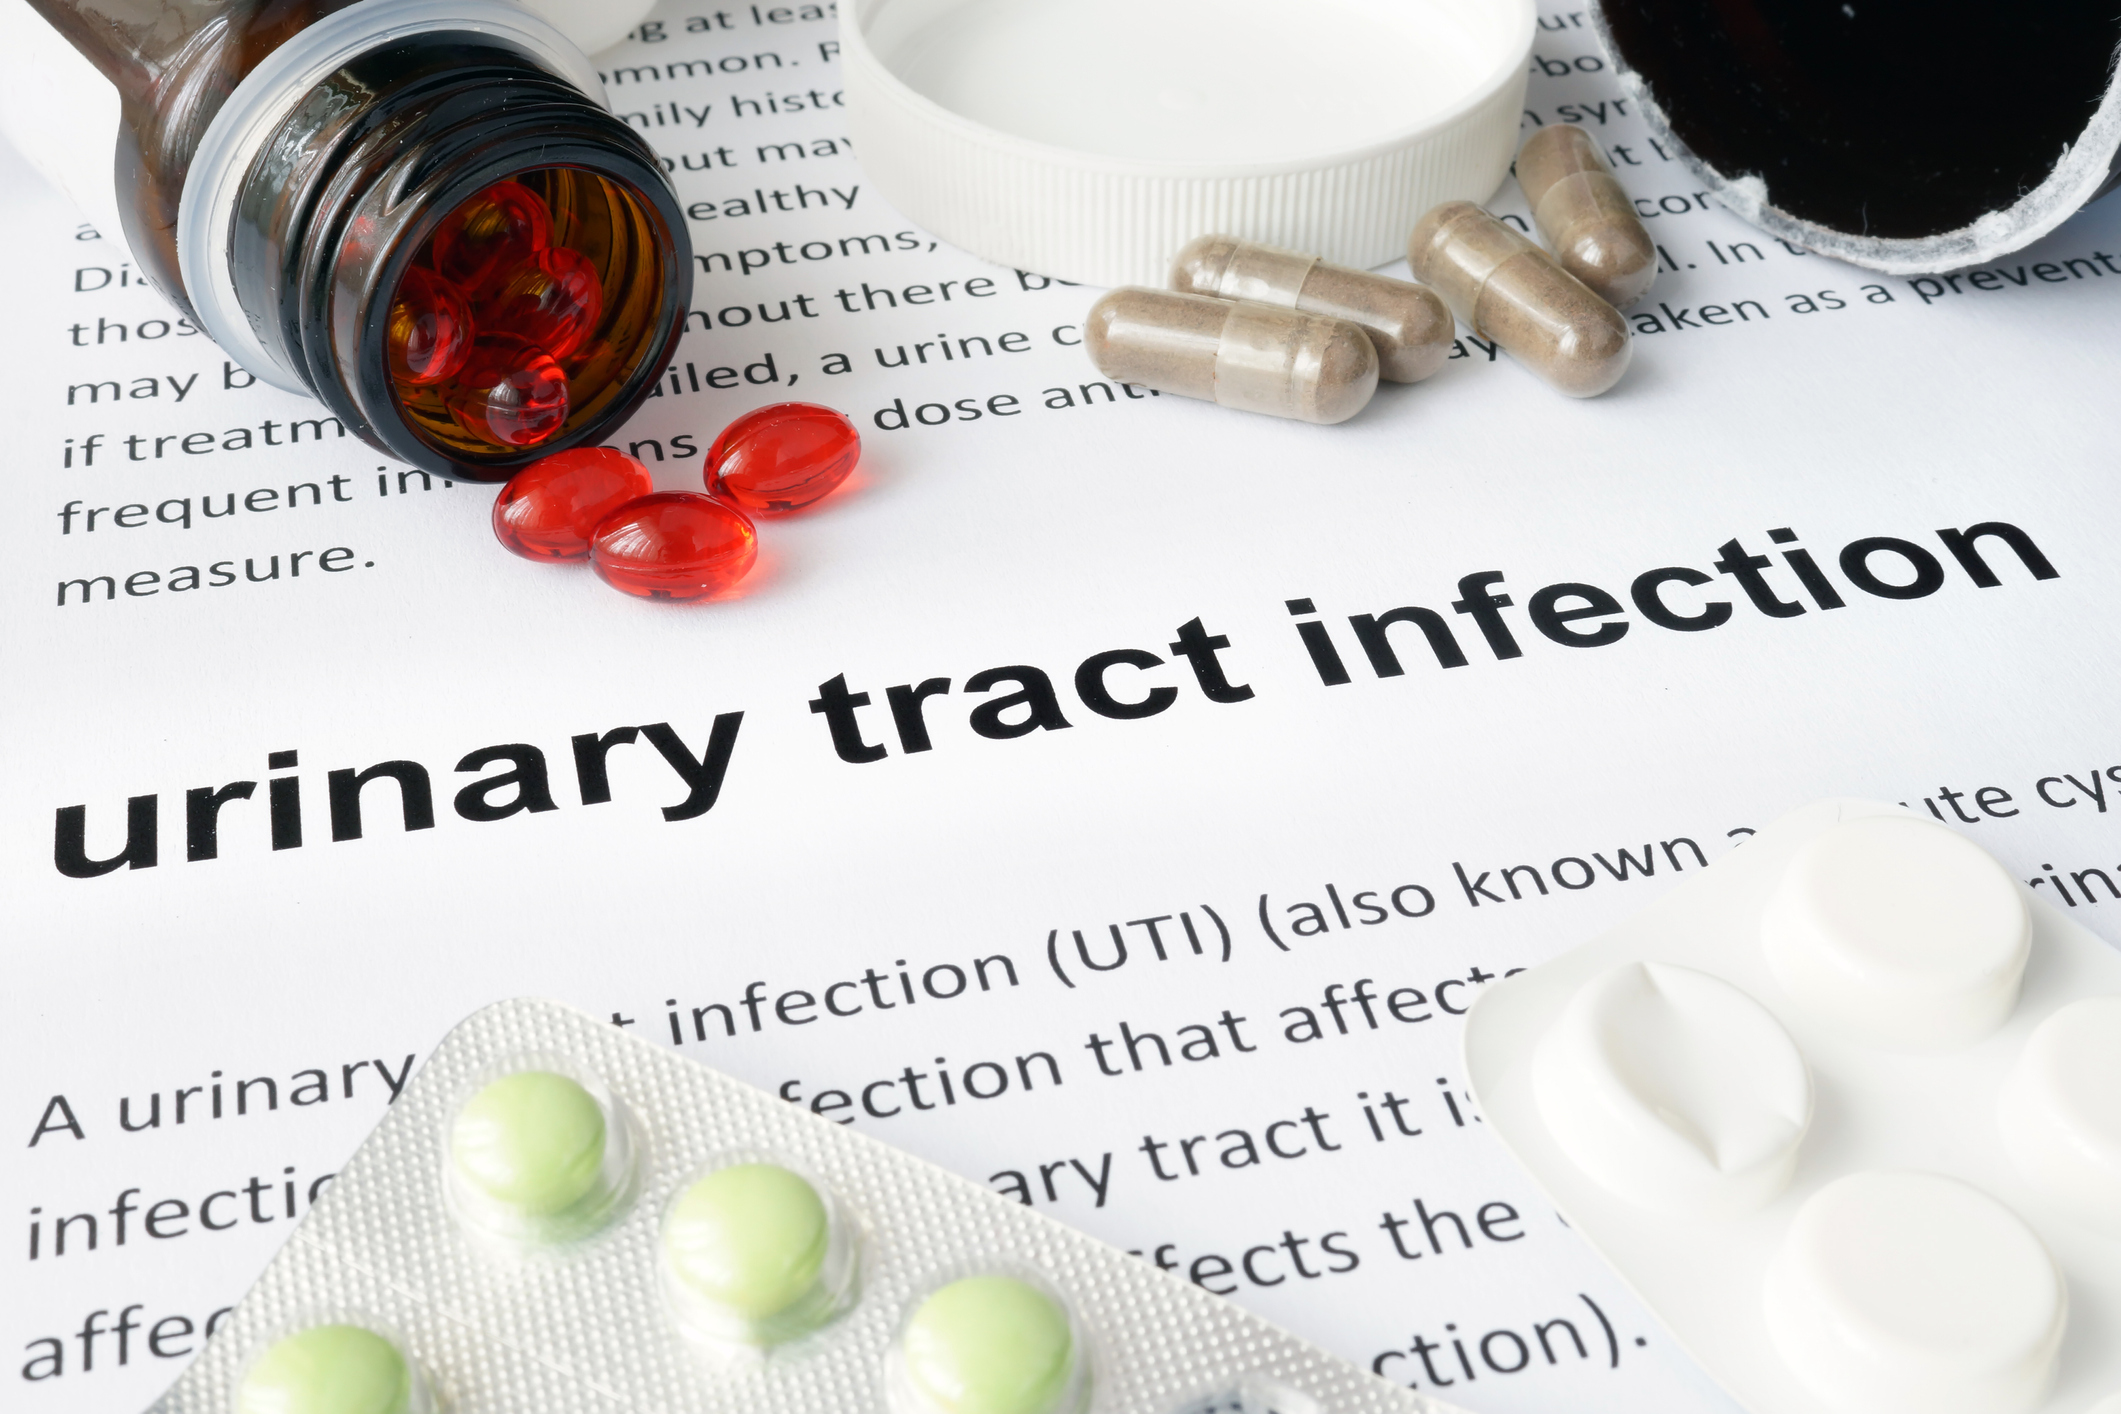 Diagnosis of a urinary tract infection